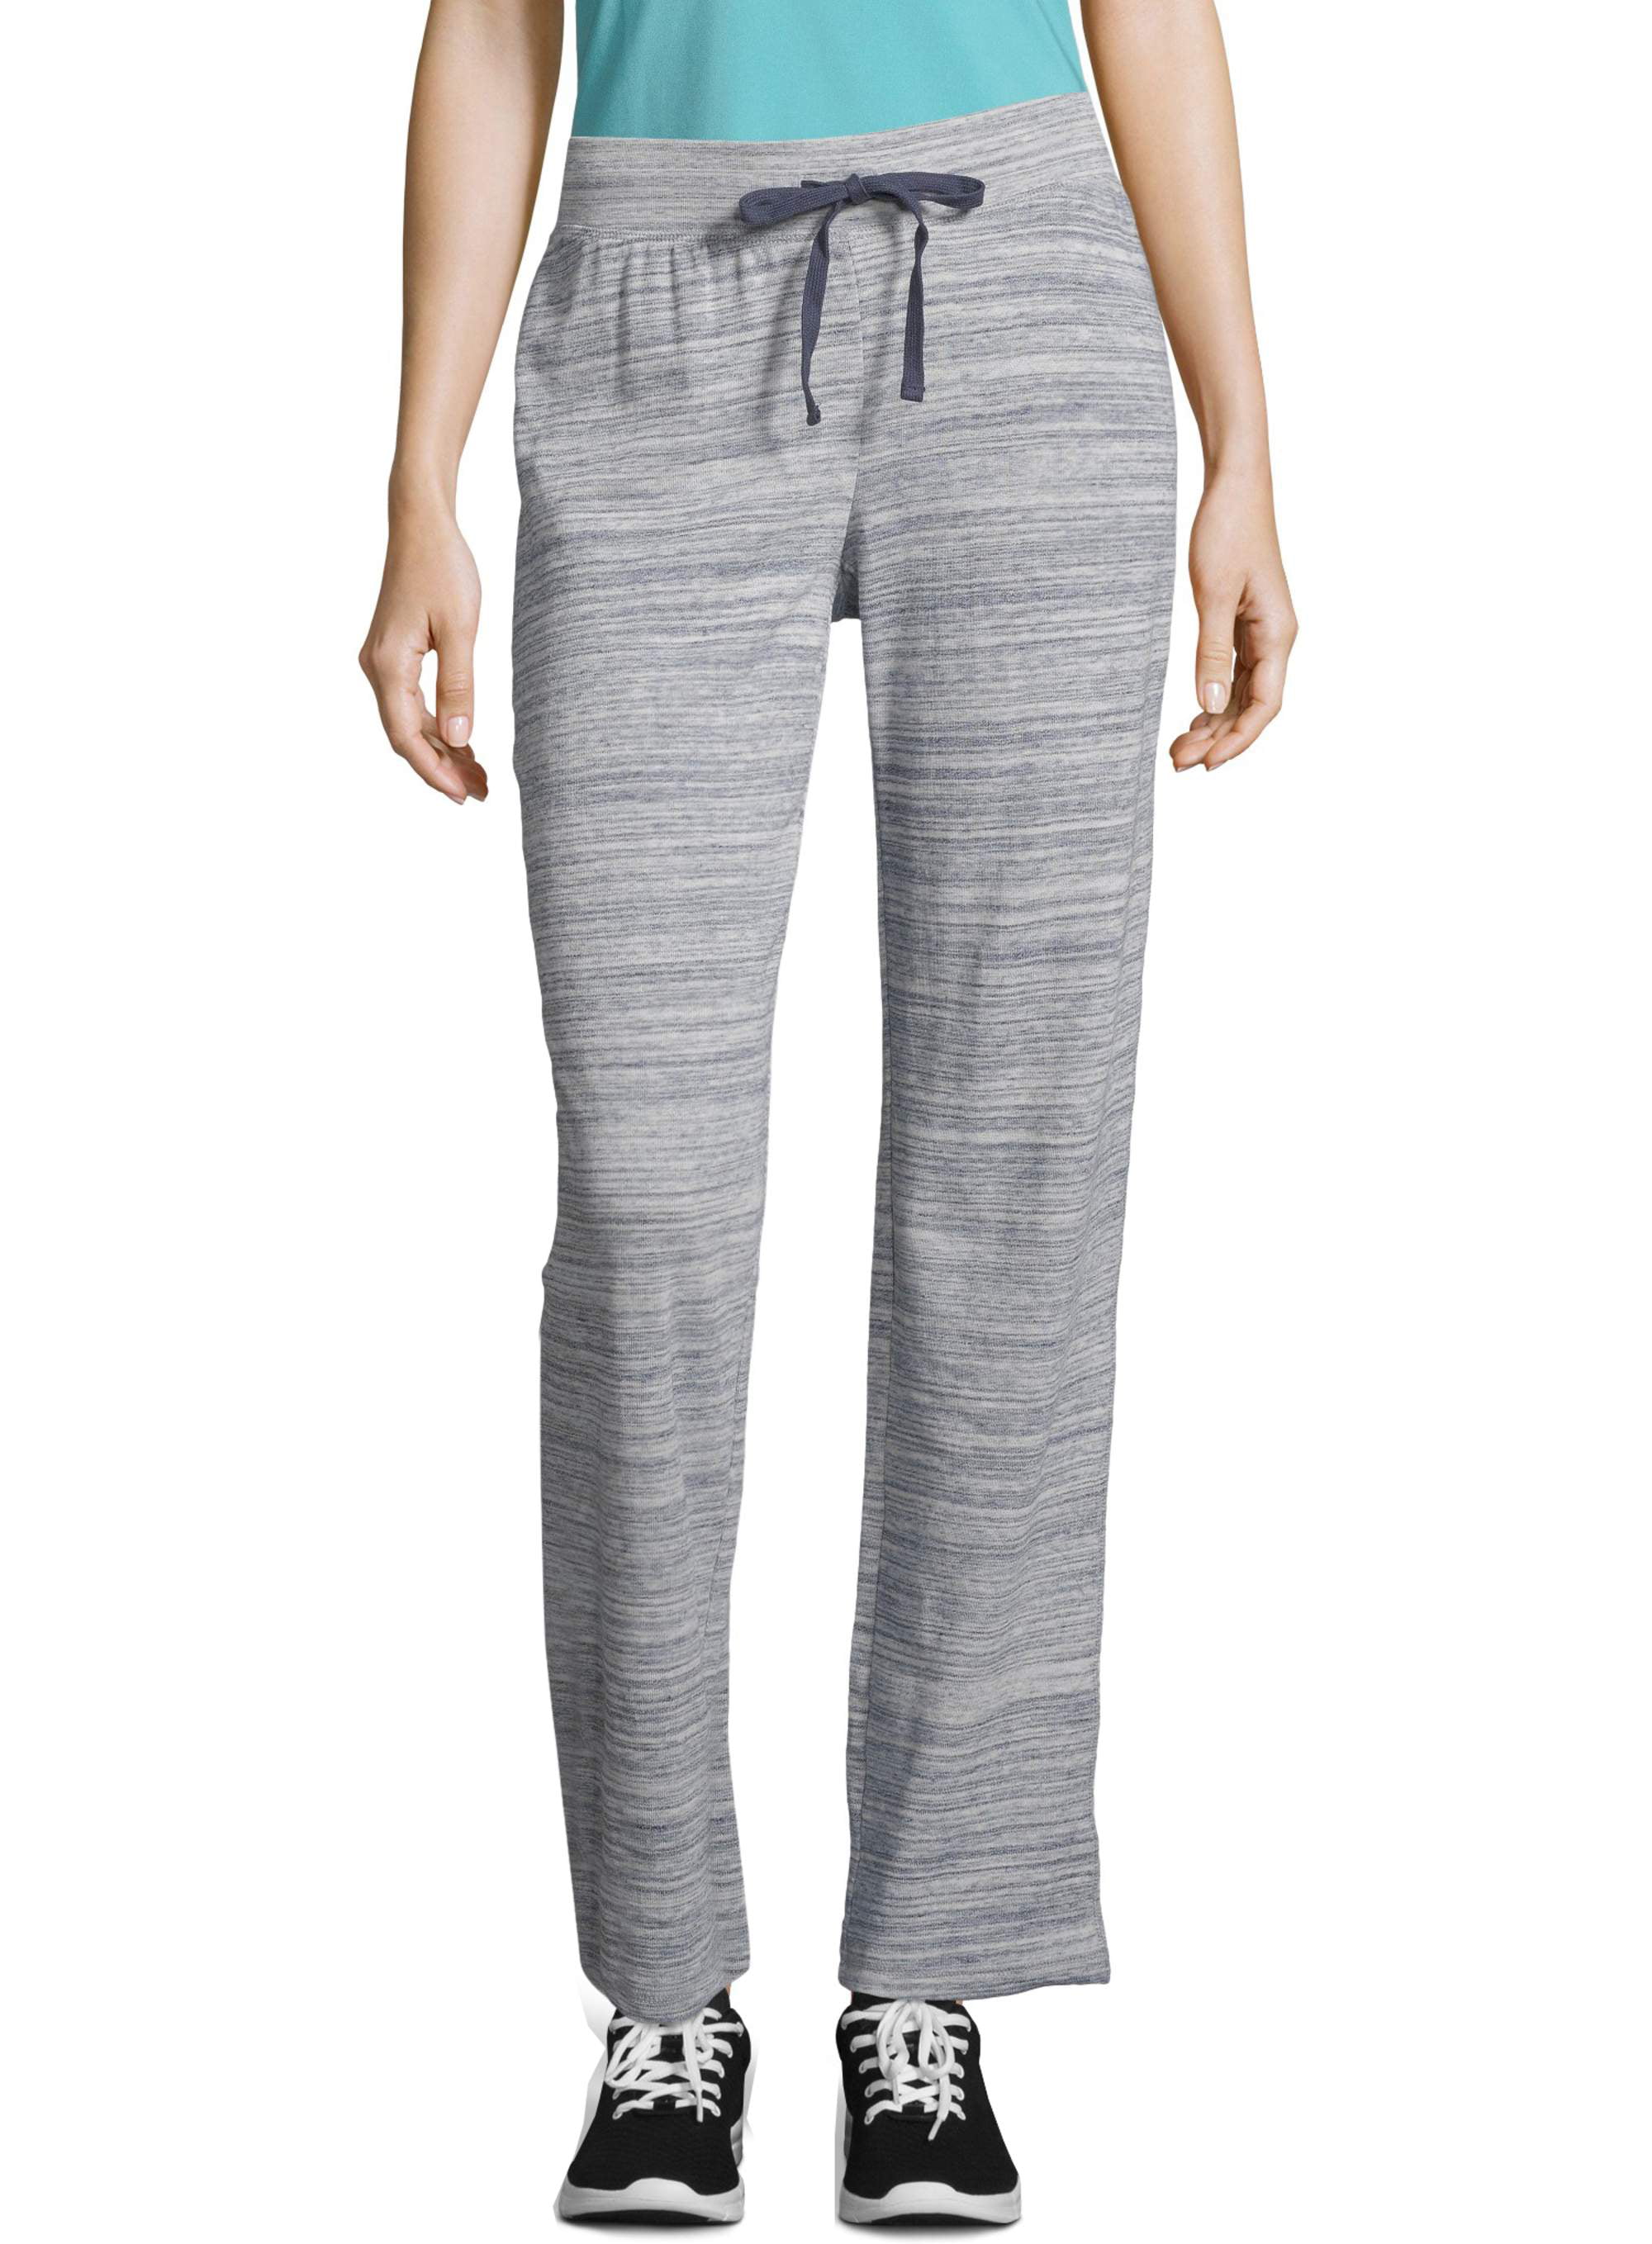 Hanes Women's French Terry Pant with Outside Drawcord - Walmart.com